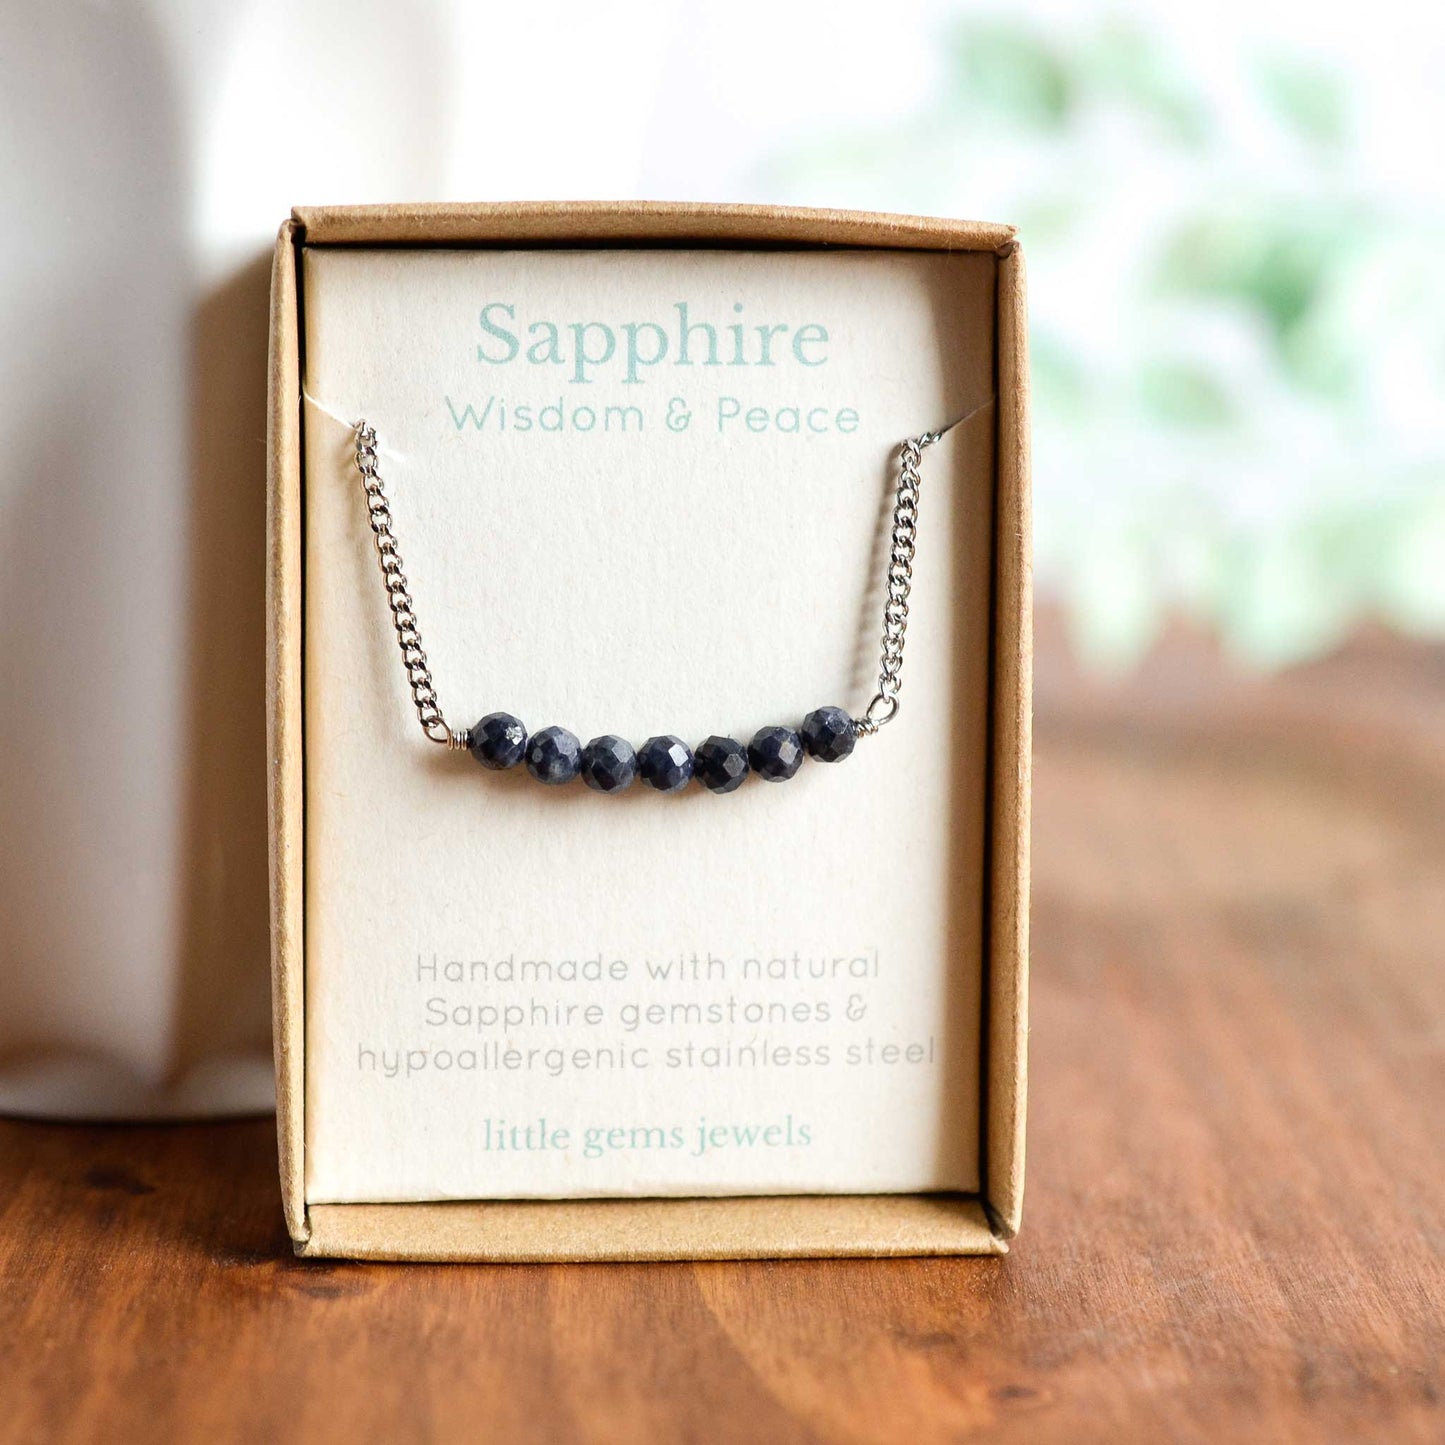 Sapphire gemstone necklace in eco friendly gift box